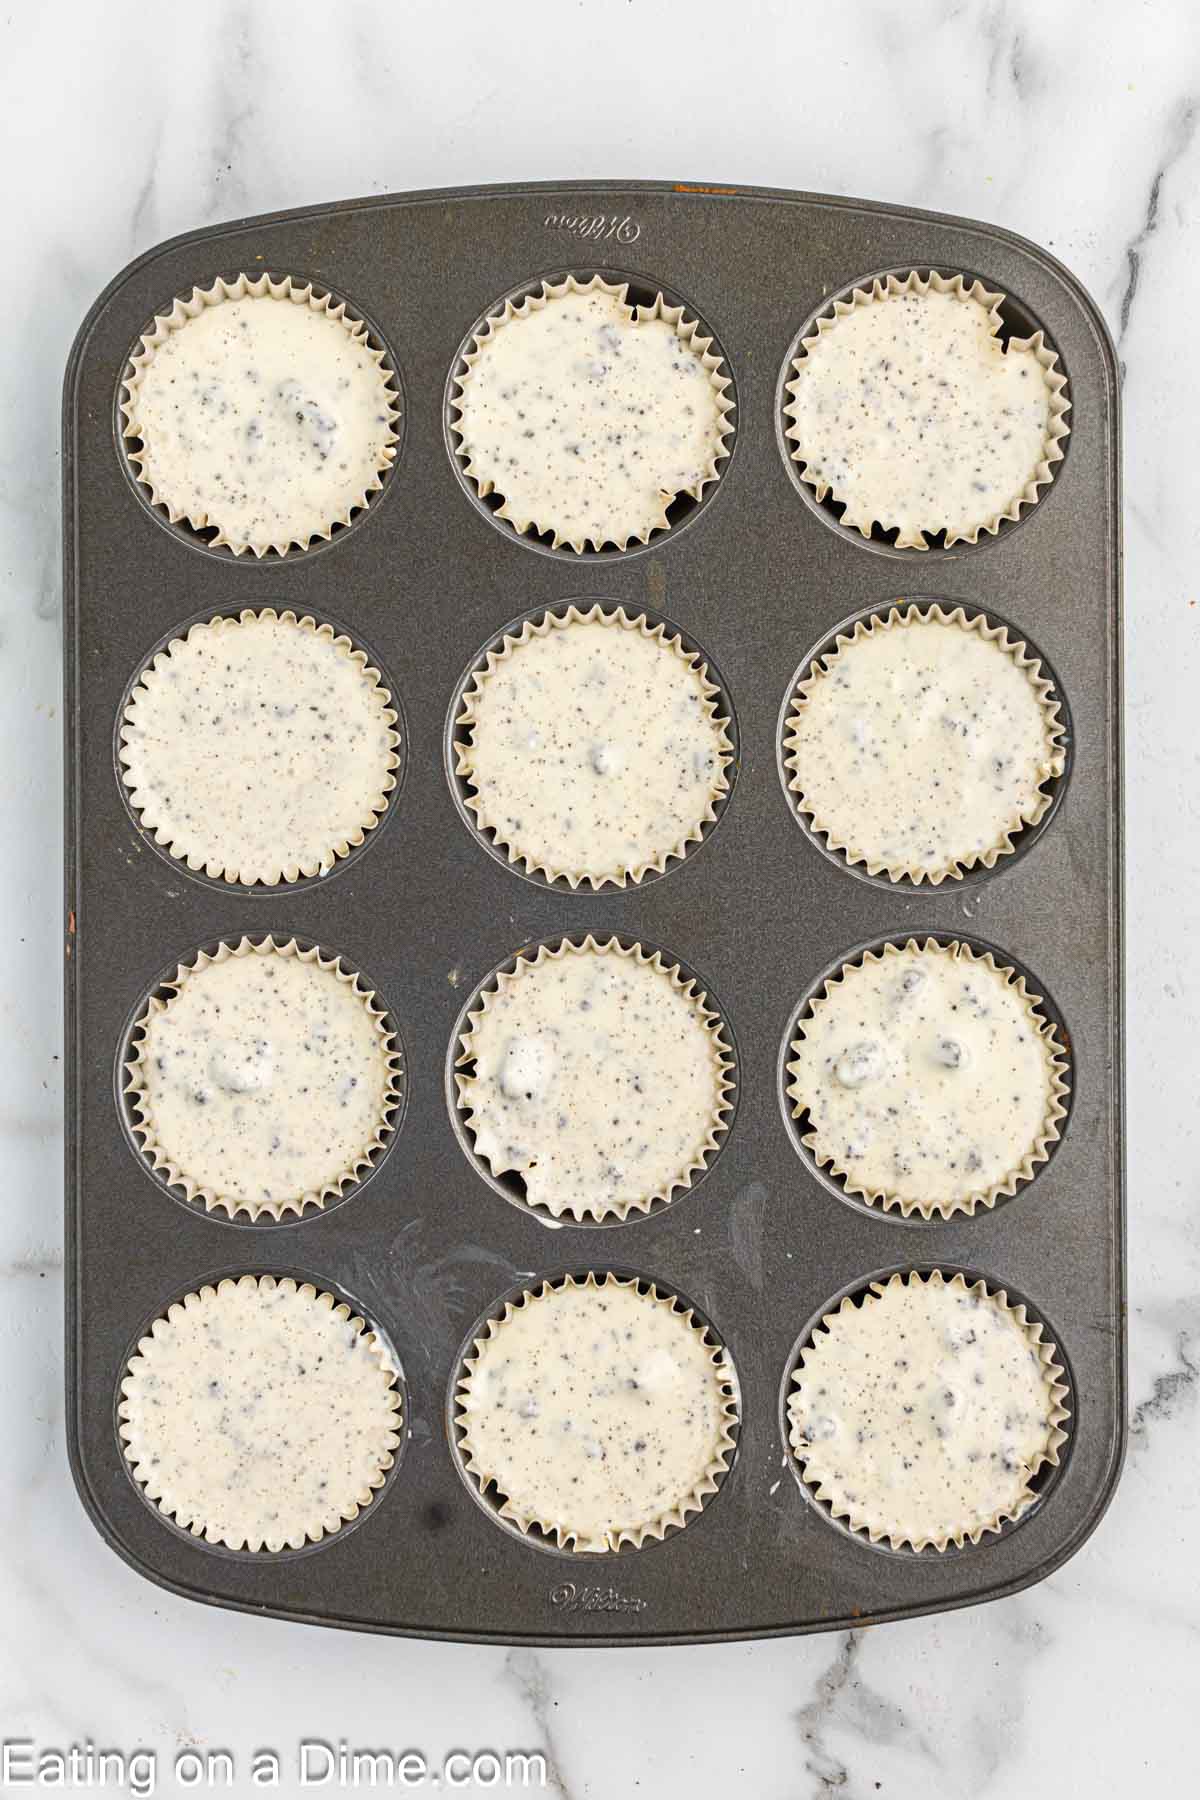 Placing the Oreo Cheesecake batter in muffin cups